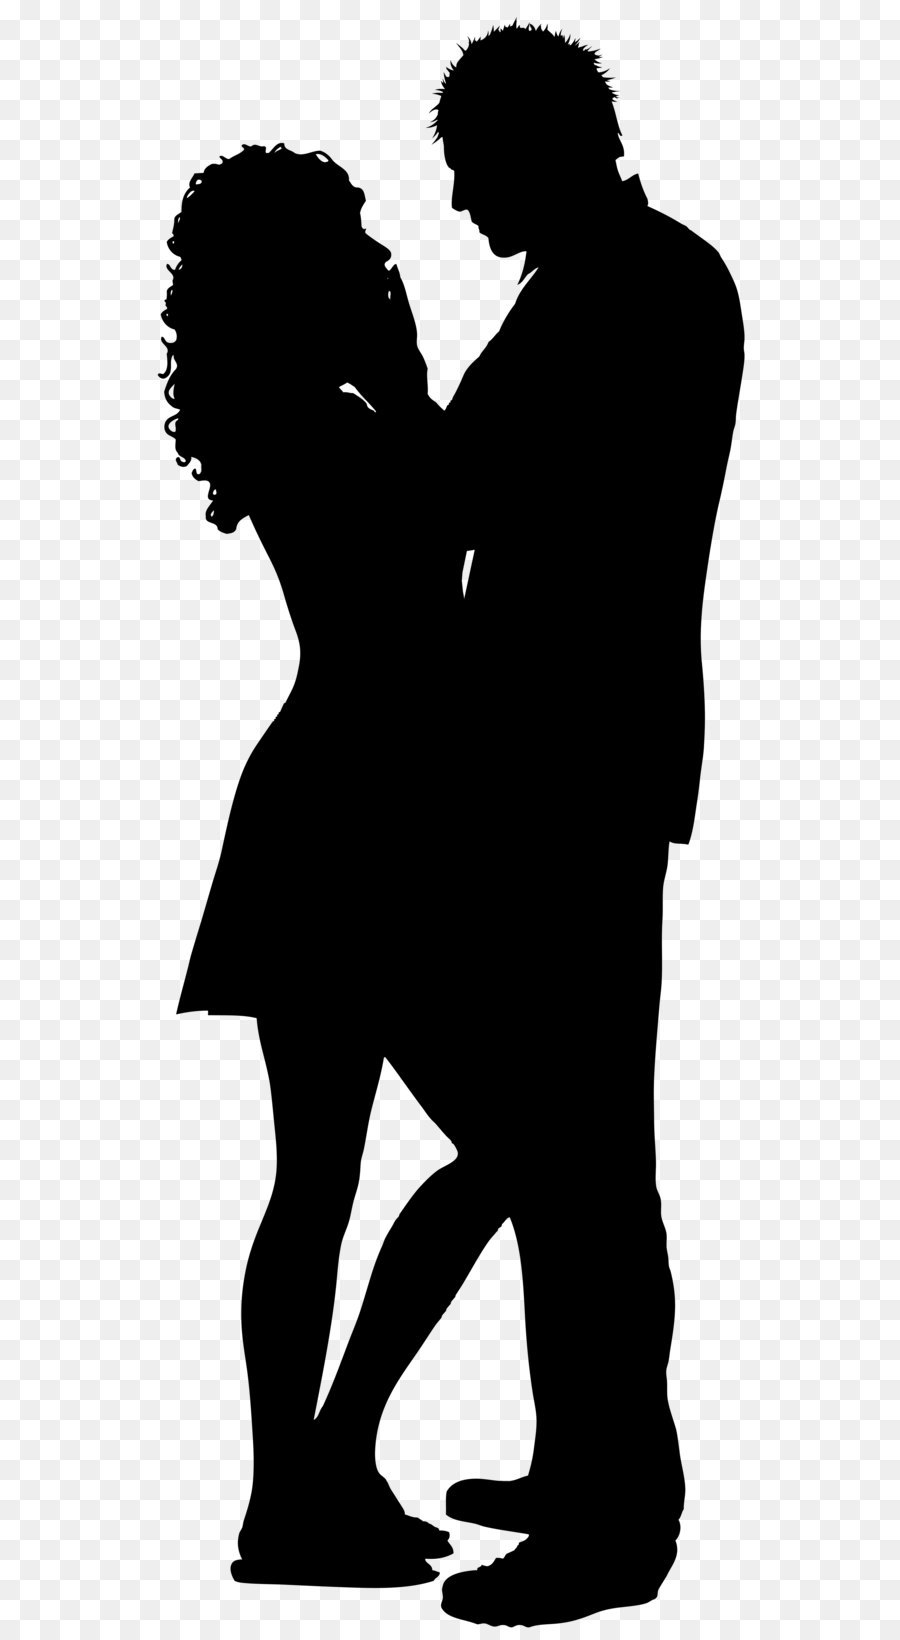 Scalable Vector Graphics - Couple Silhouette PNG Clip Art Image png download - 3181*8000 - Free Transparent Silhouette png Download.